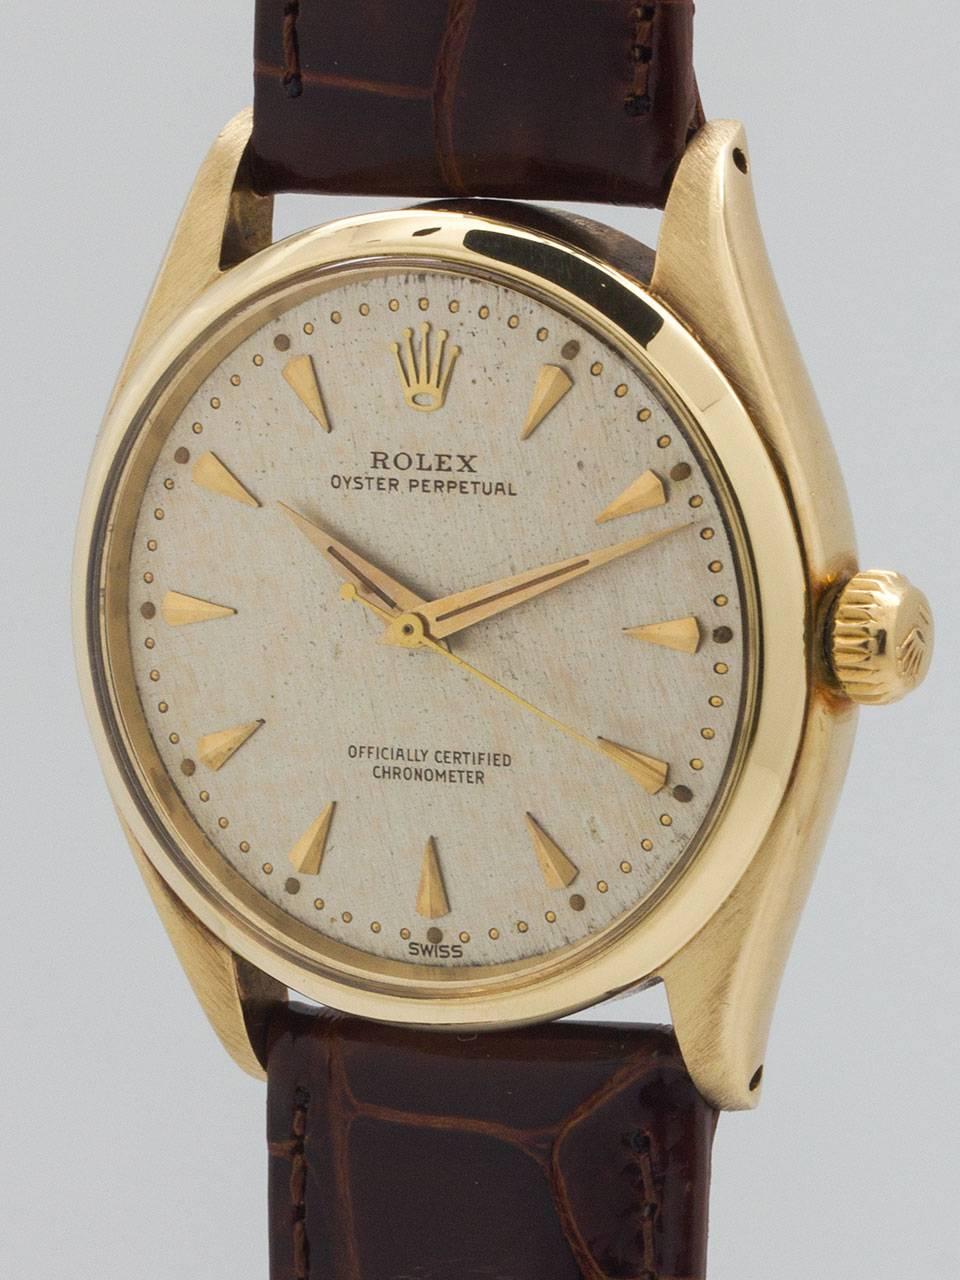 Rolex 14K Yellow Gold Oyster Perpetual Wristwatch ref 6564 serial number 435,xxx circa 1960. Featuring 34mm diameter Oyster case with smooth bezel, acrylic crystal, screw down crown and case back. Featuring an unusual, original matte silvered finely